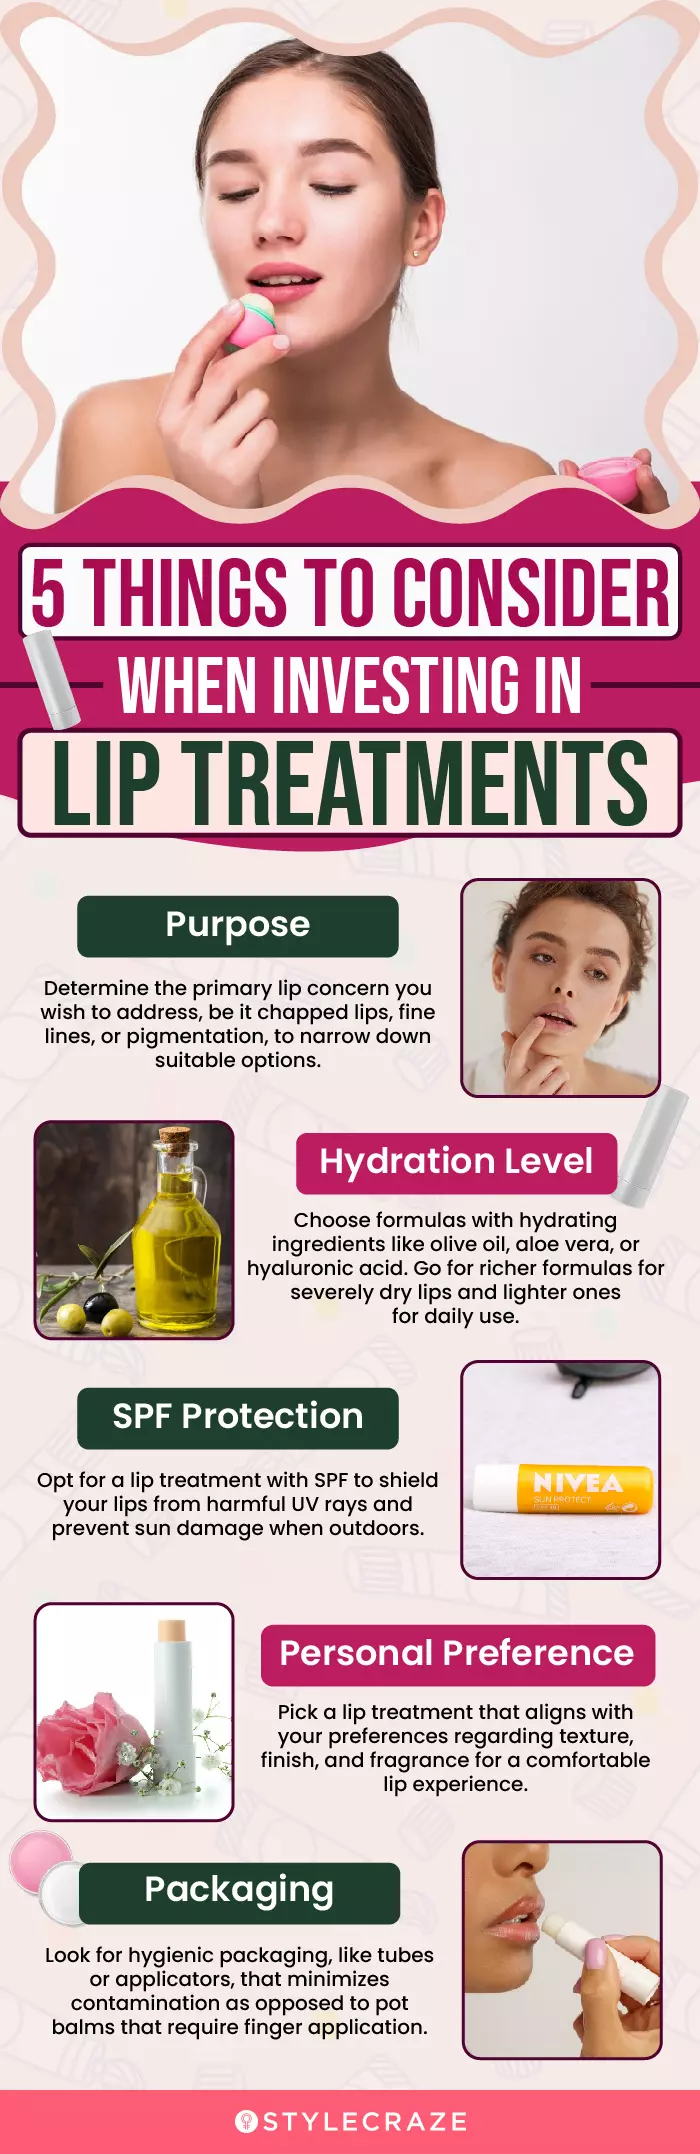 5 Things To Consider When Investing In Lip Treatments (infographic)